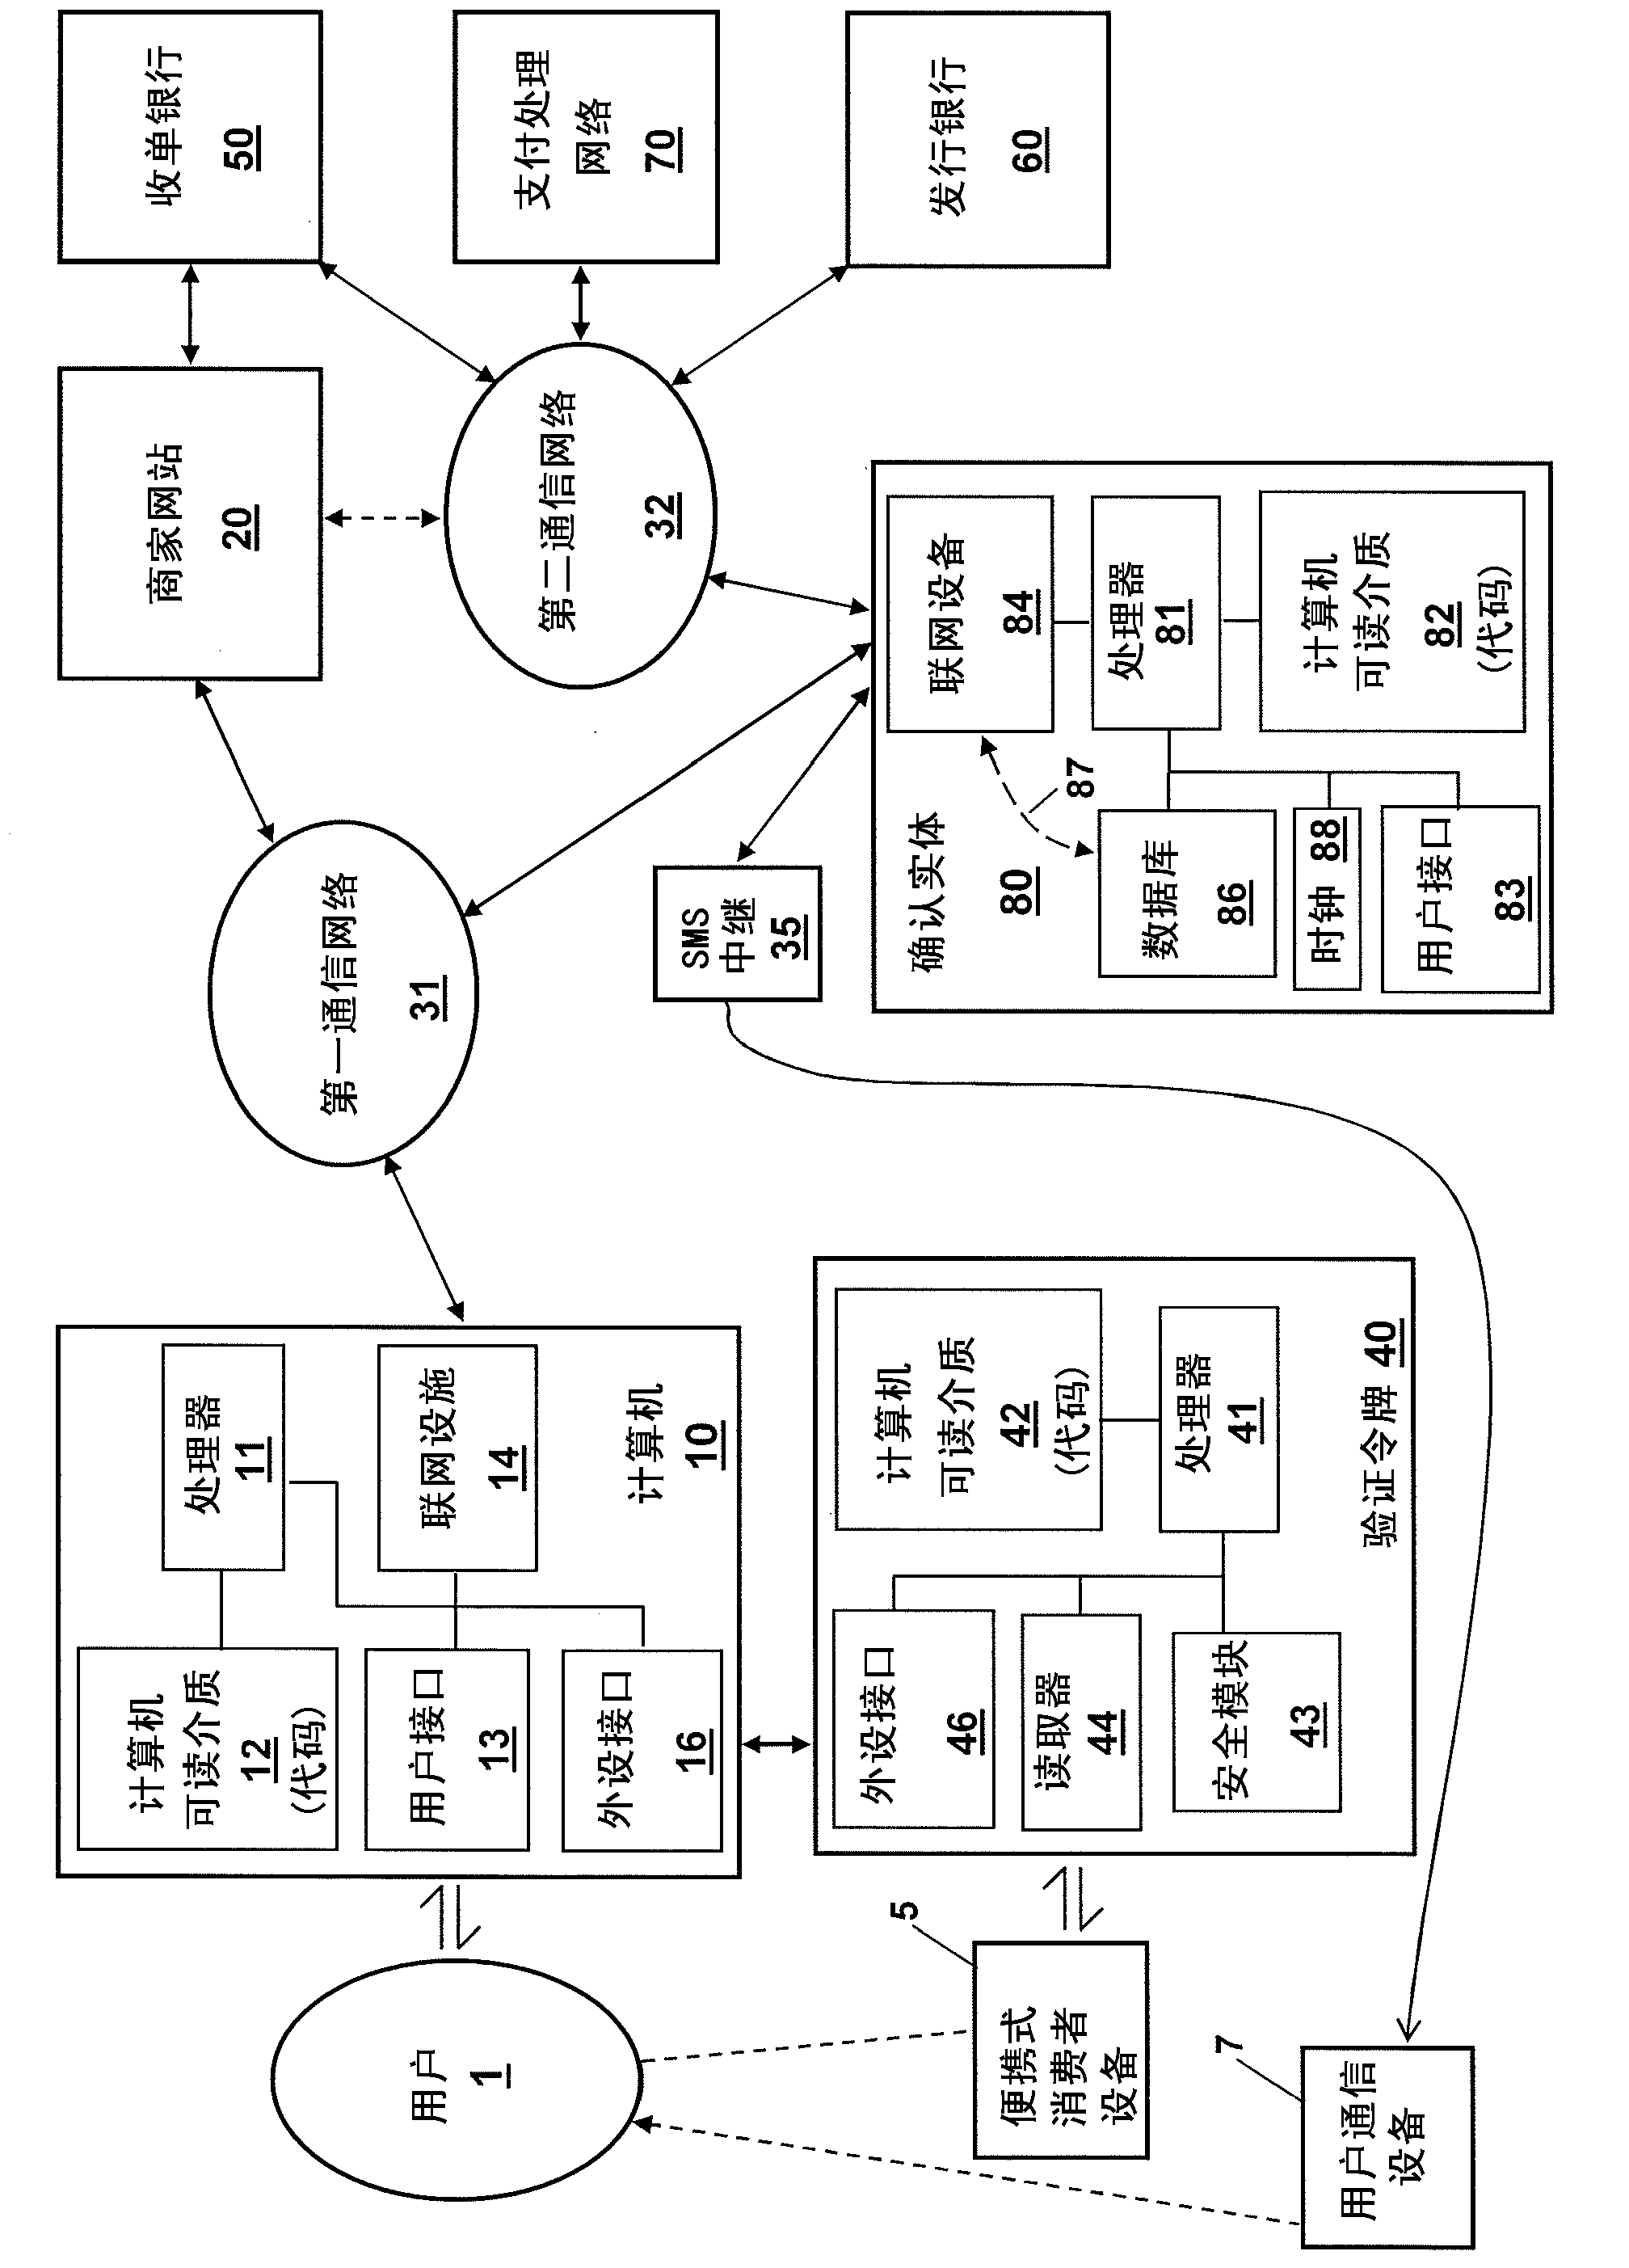 Integration of verification tokens with mobile communication devices